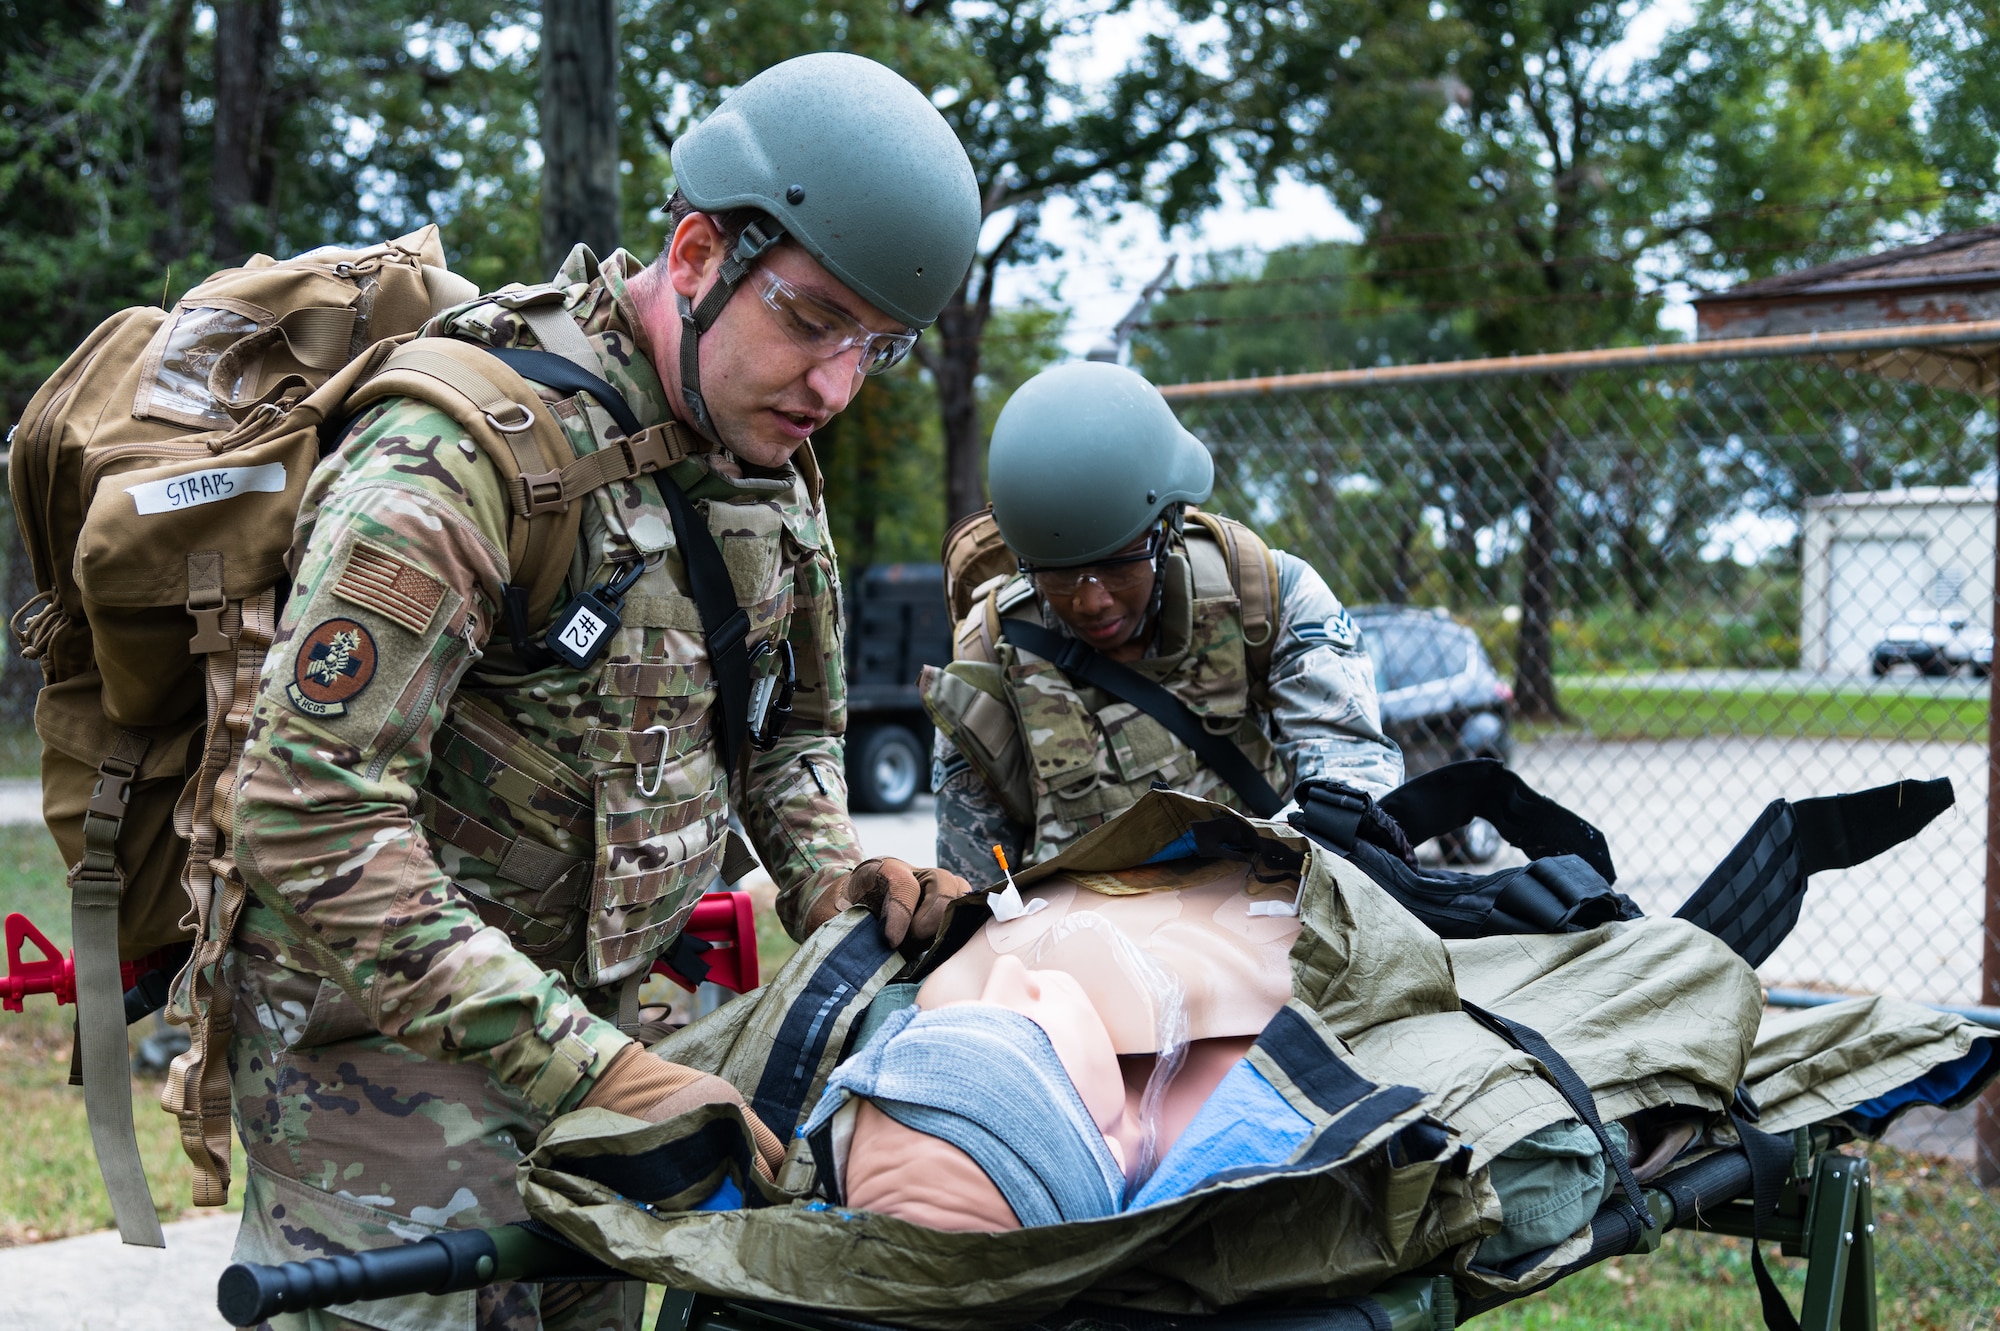 Exercises like these ensure the readiness and capability of Air Force personnel.